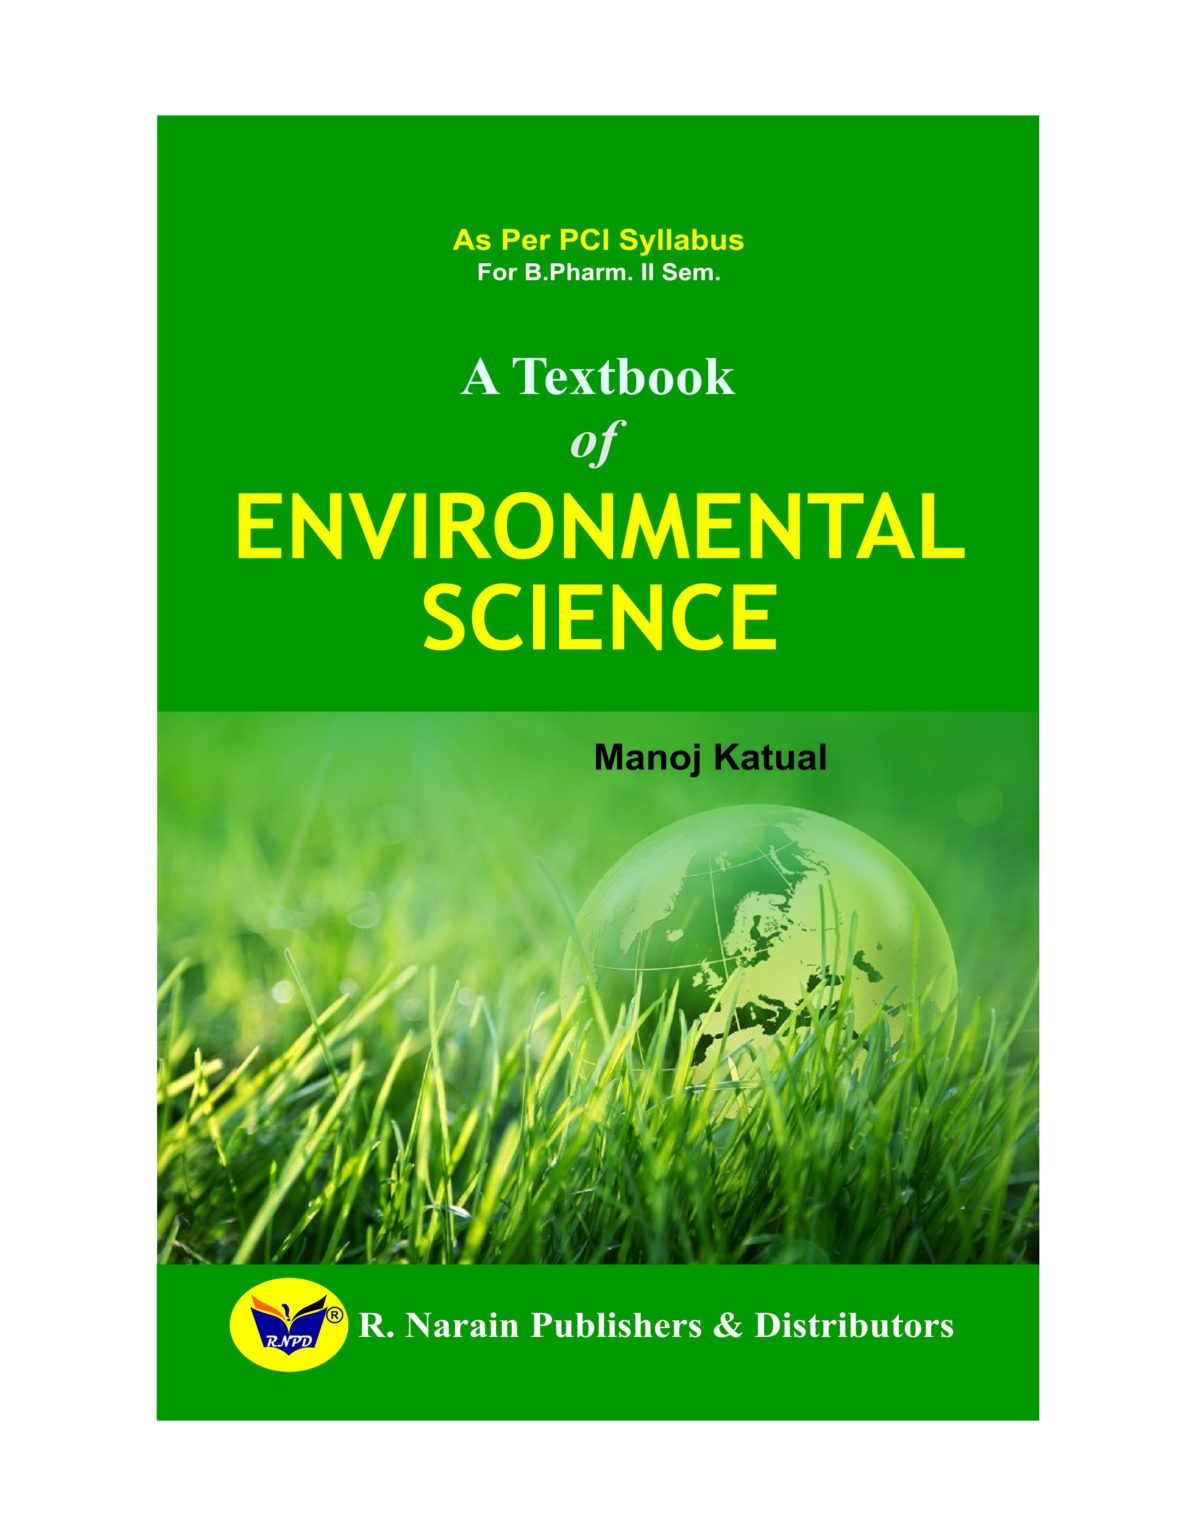 research title about environmental science